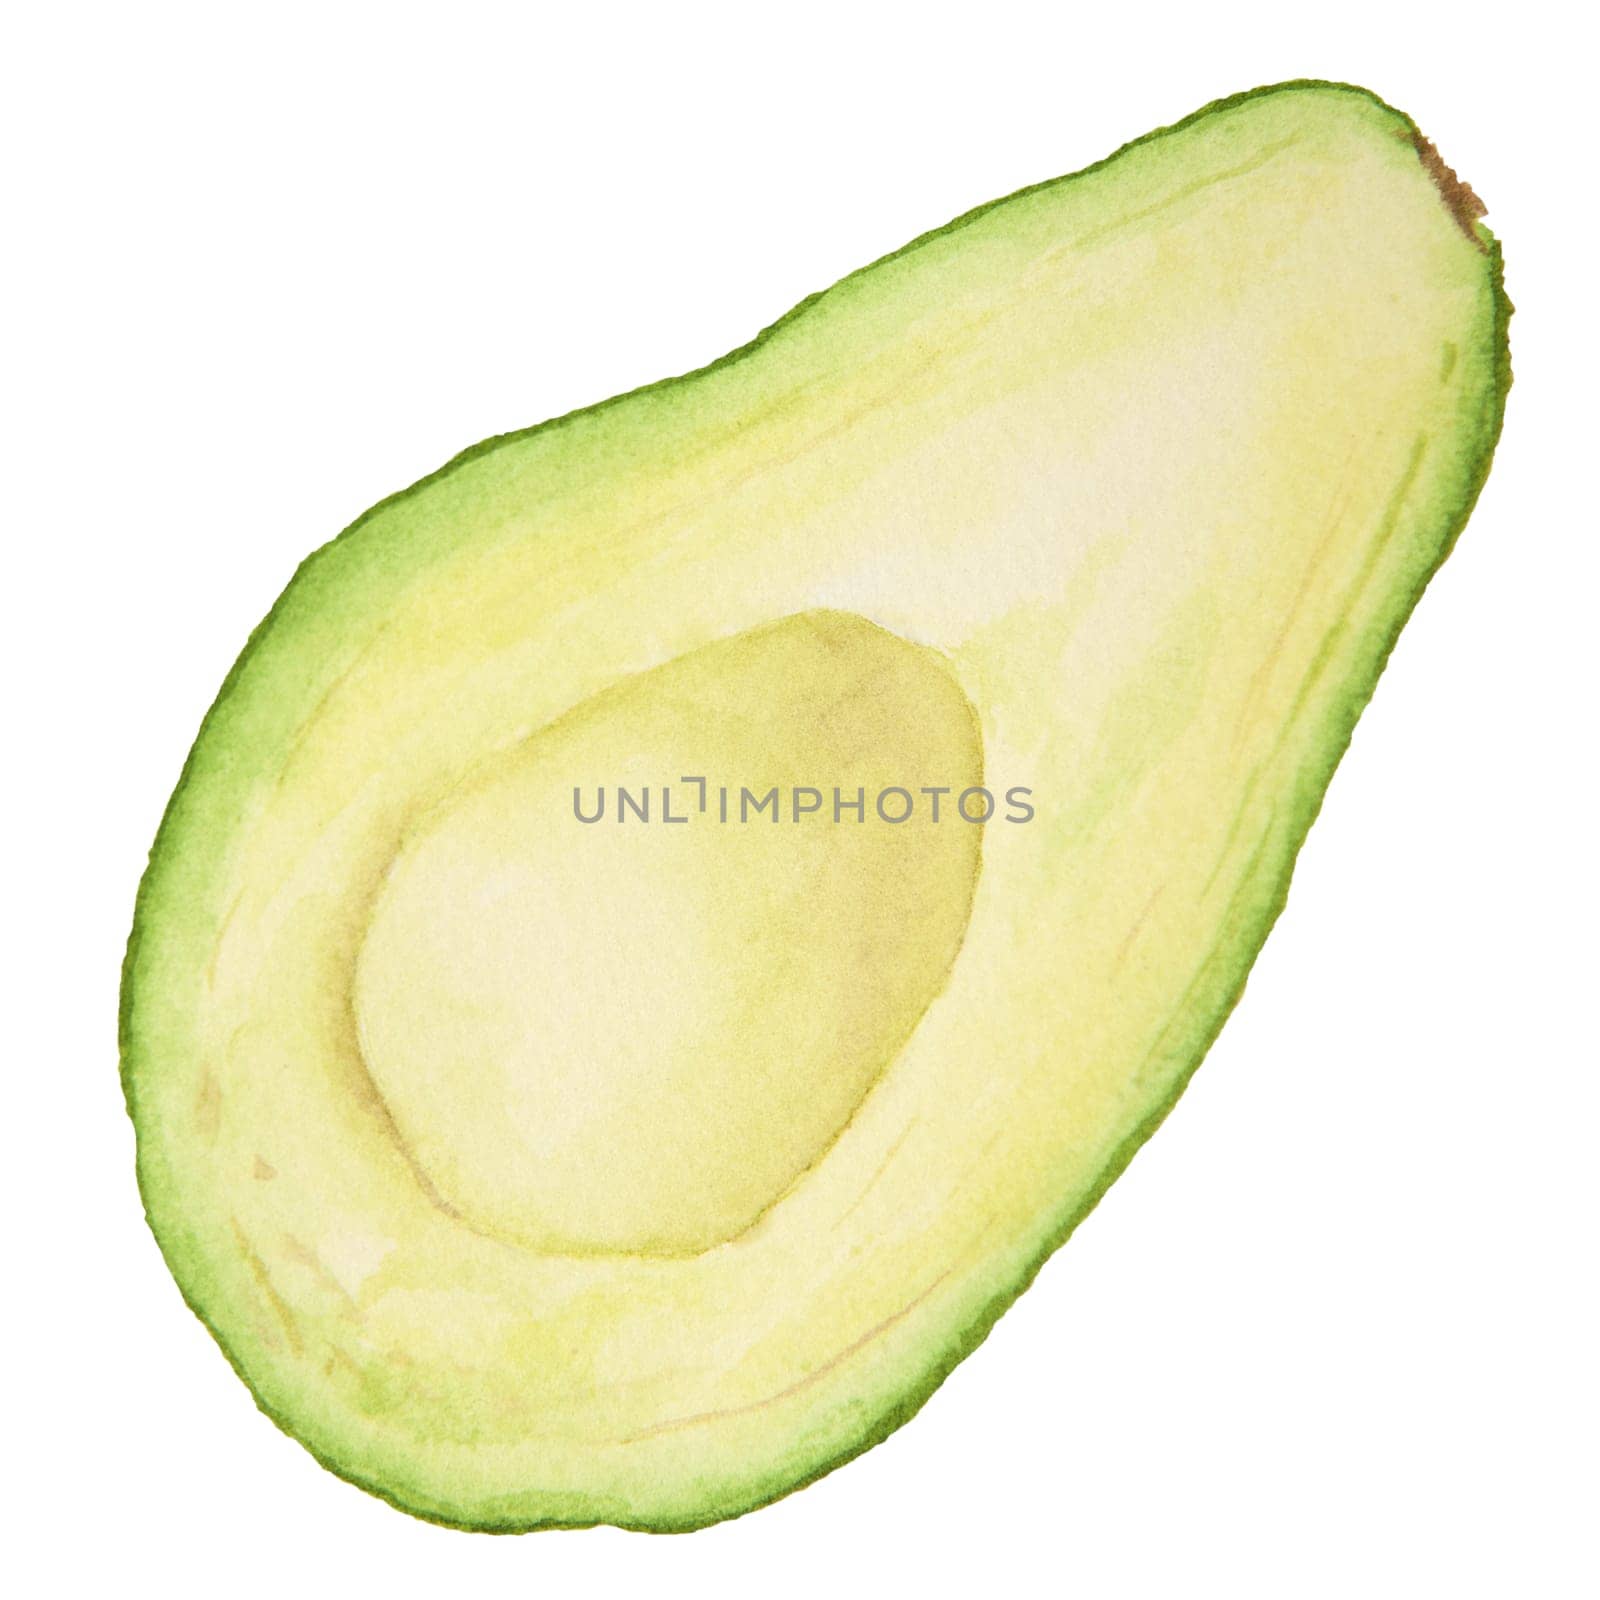 Avocado half watercolor hand drawn realistic illustration. Green and fresh art of salad, sauce, guacamole, smoothie ingredient. For textile, menu, cards, paper, package, cooking books design